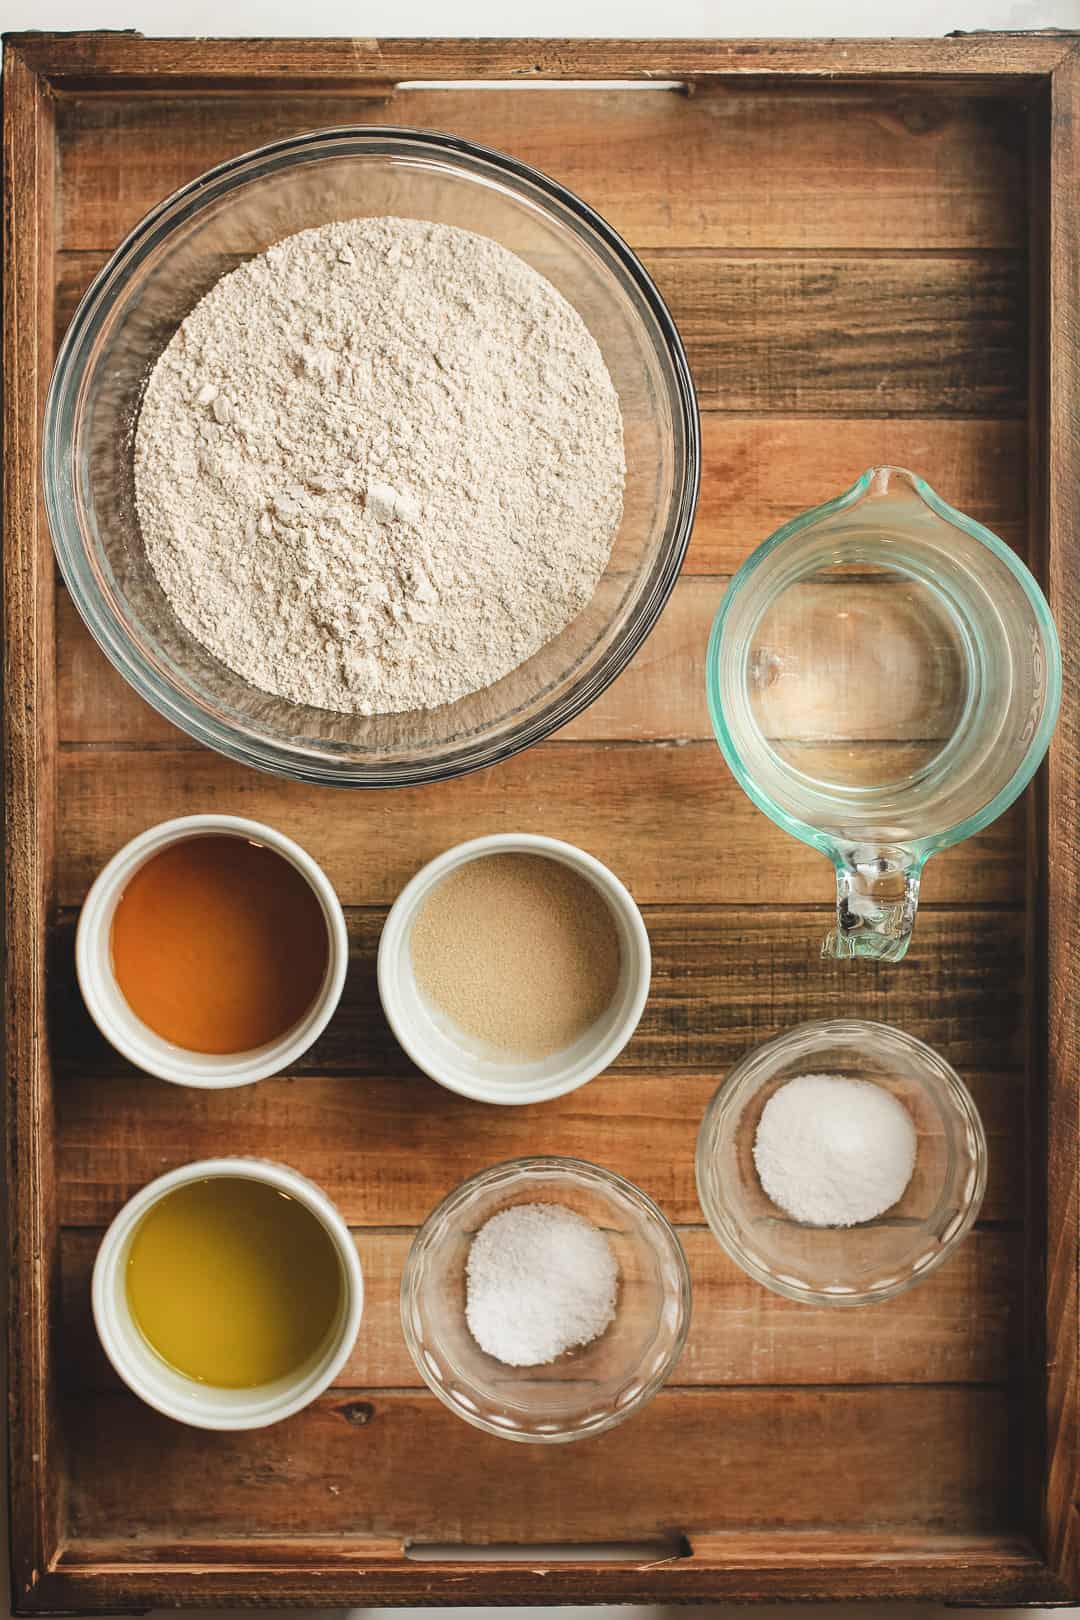 A tray of the recipe ingredients.